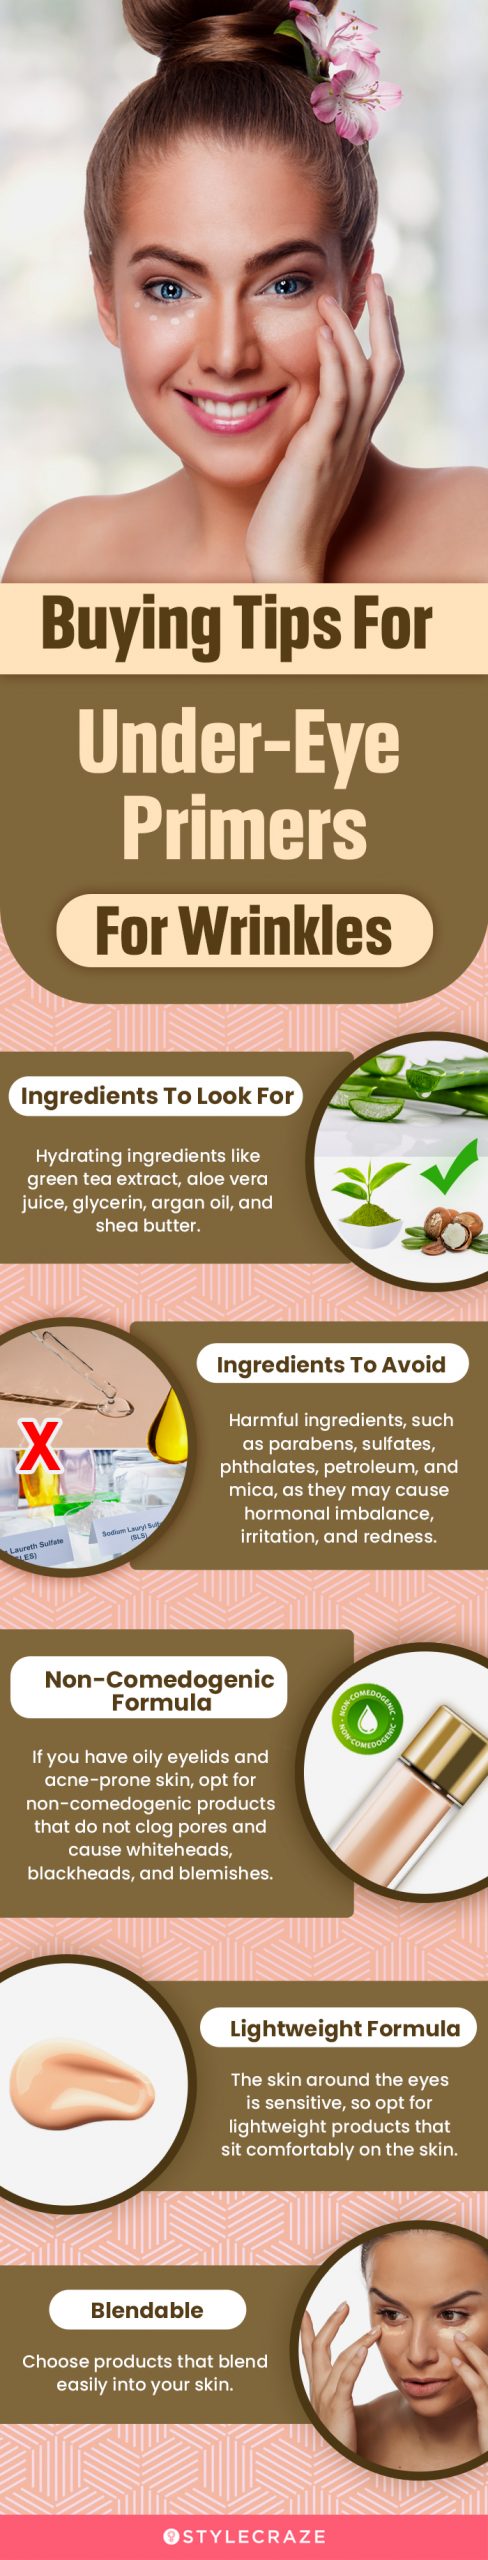 Buying Tips For Under-Eye Primers For Wrinkles [infographic]